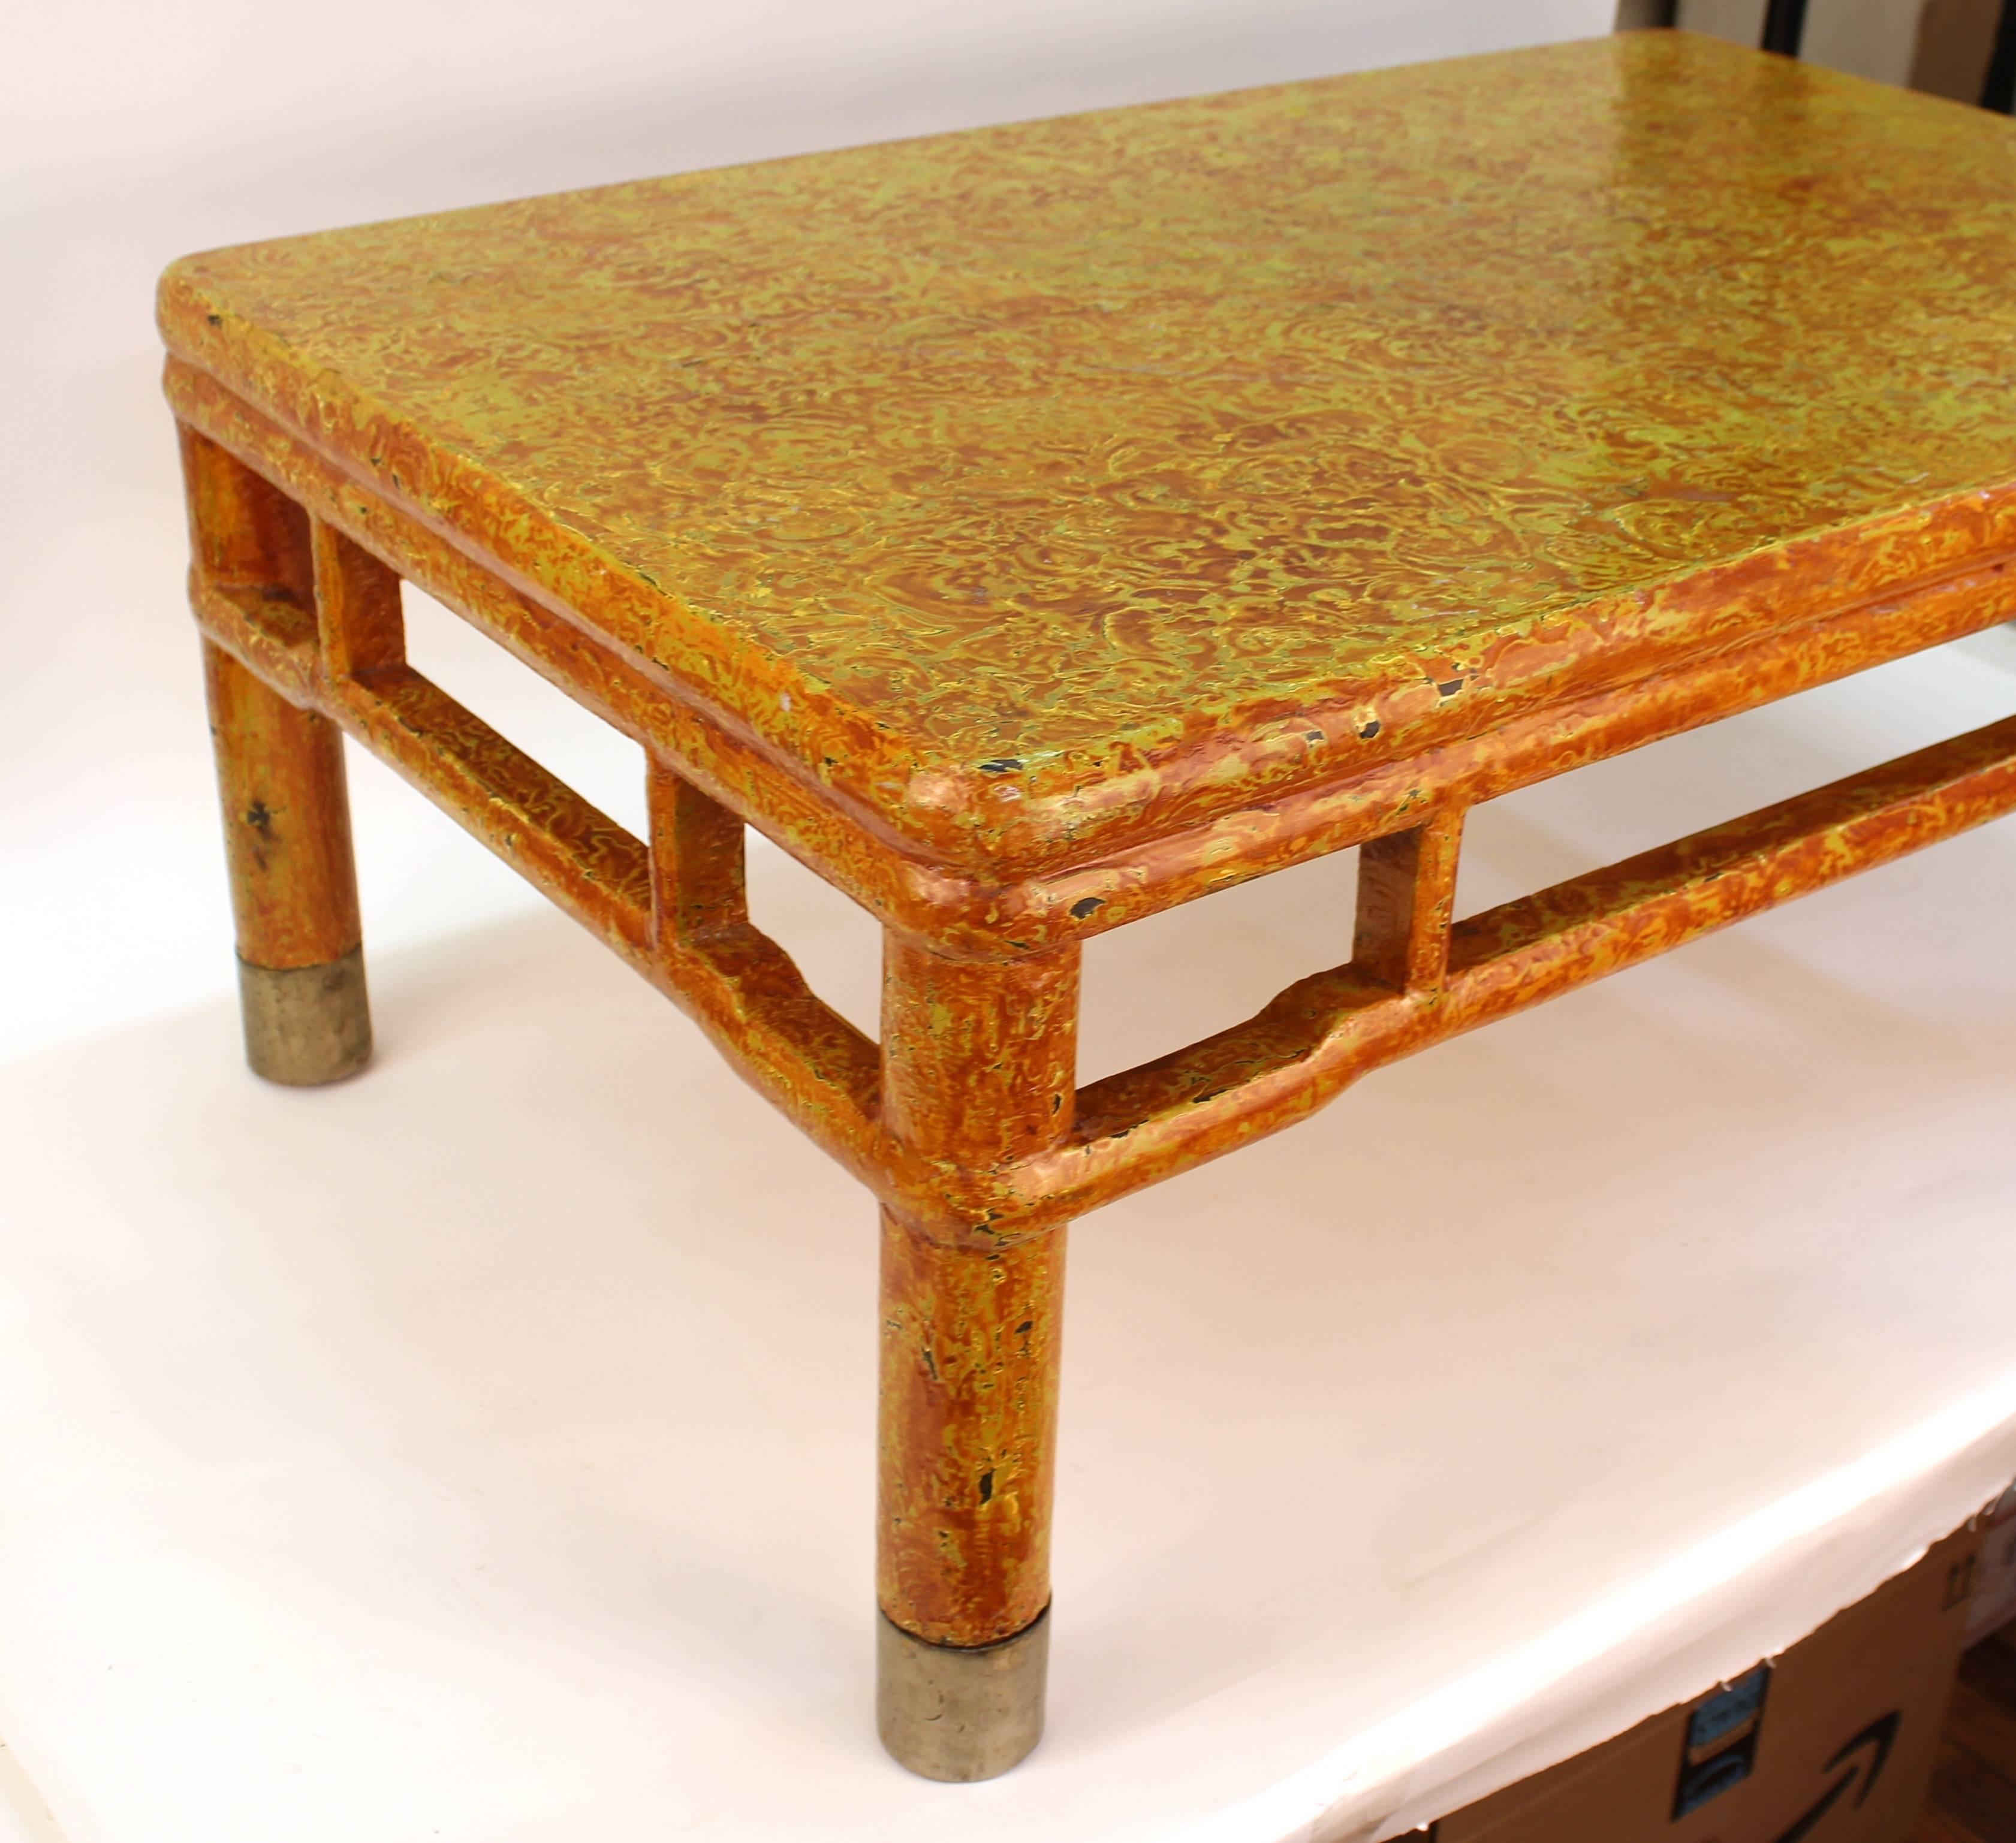 A midcentury Asian Style cocktail or coffee table on four legs with a distinct craquelure aged finish. The piece is in good vintage condition with age appropriate wear.